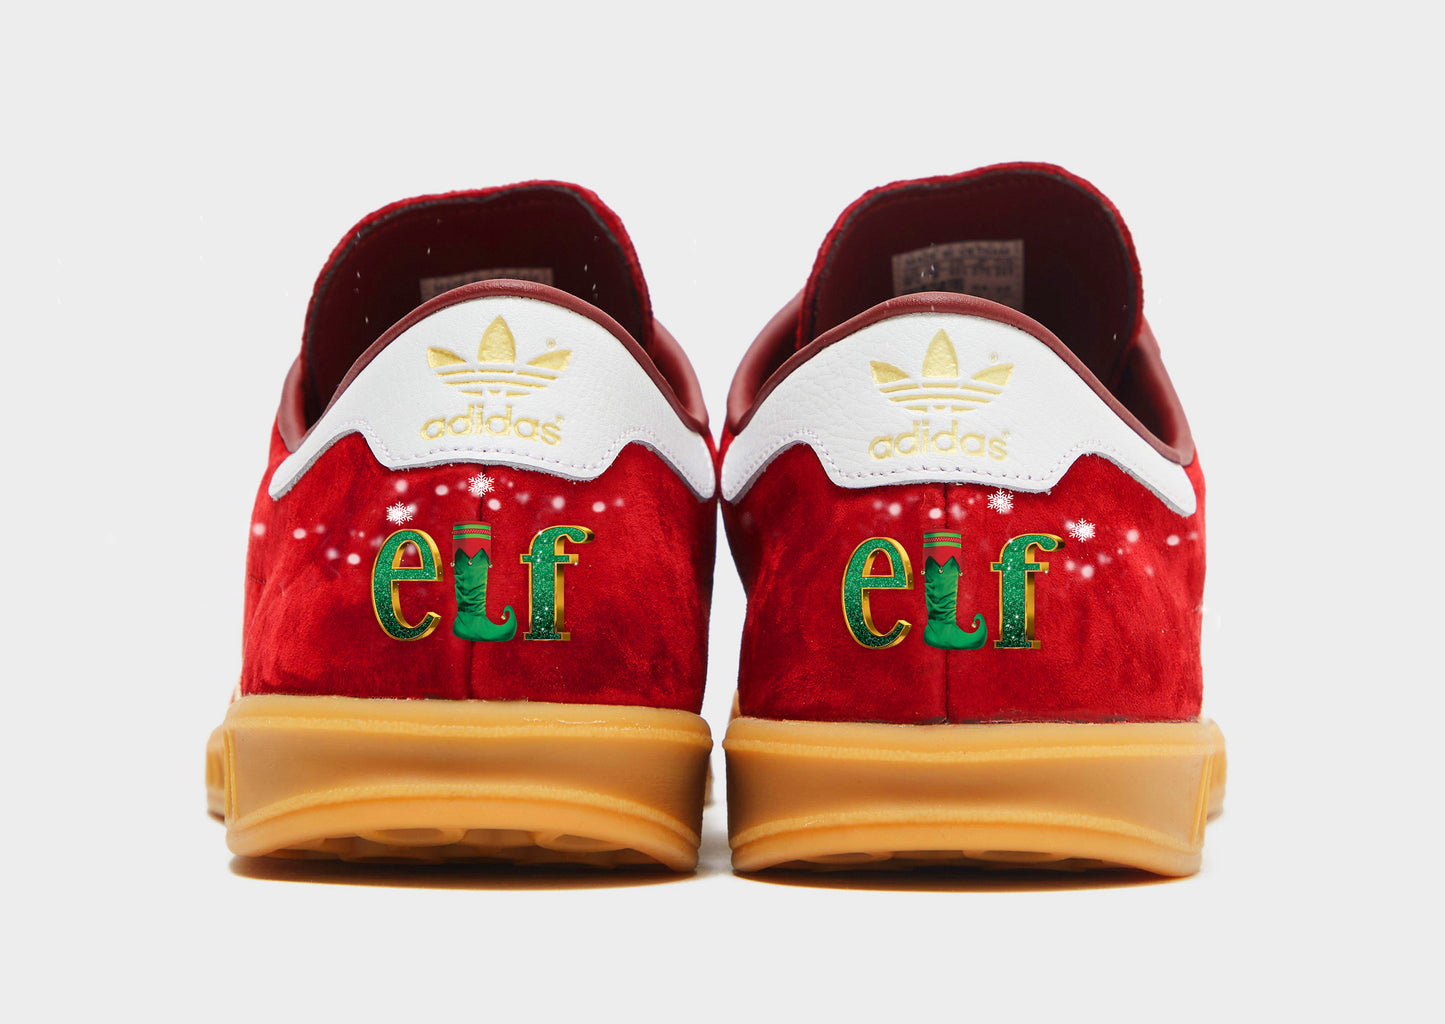 Limited edition Elf (Buddy) Christmas movie red / white / green Adidas Hamburg trainers / sneakers